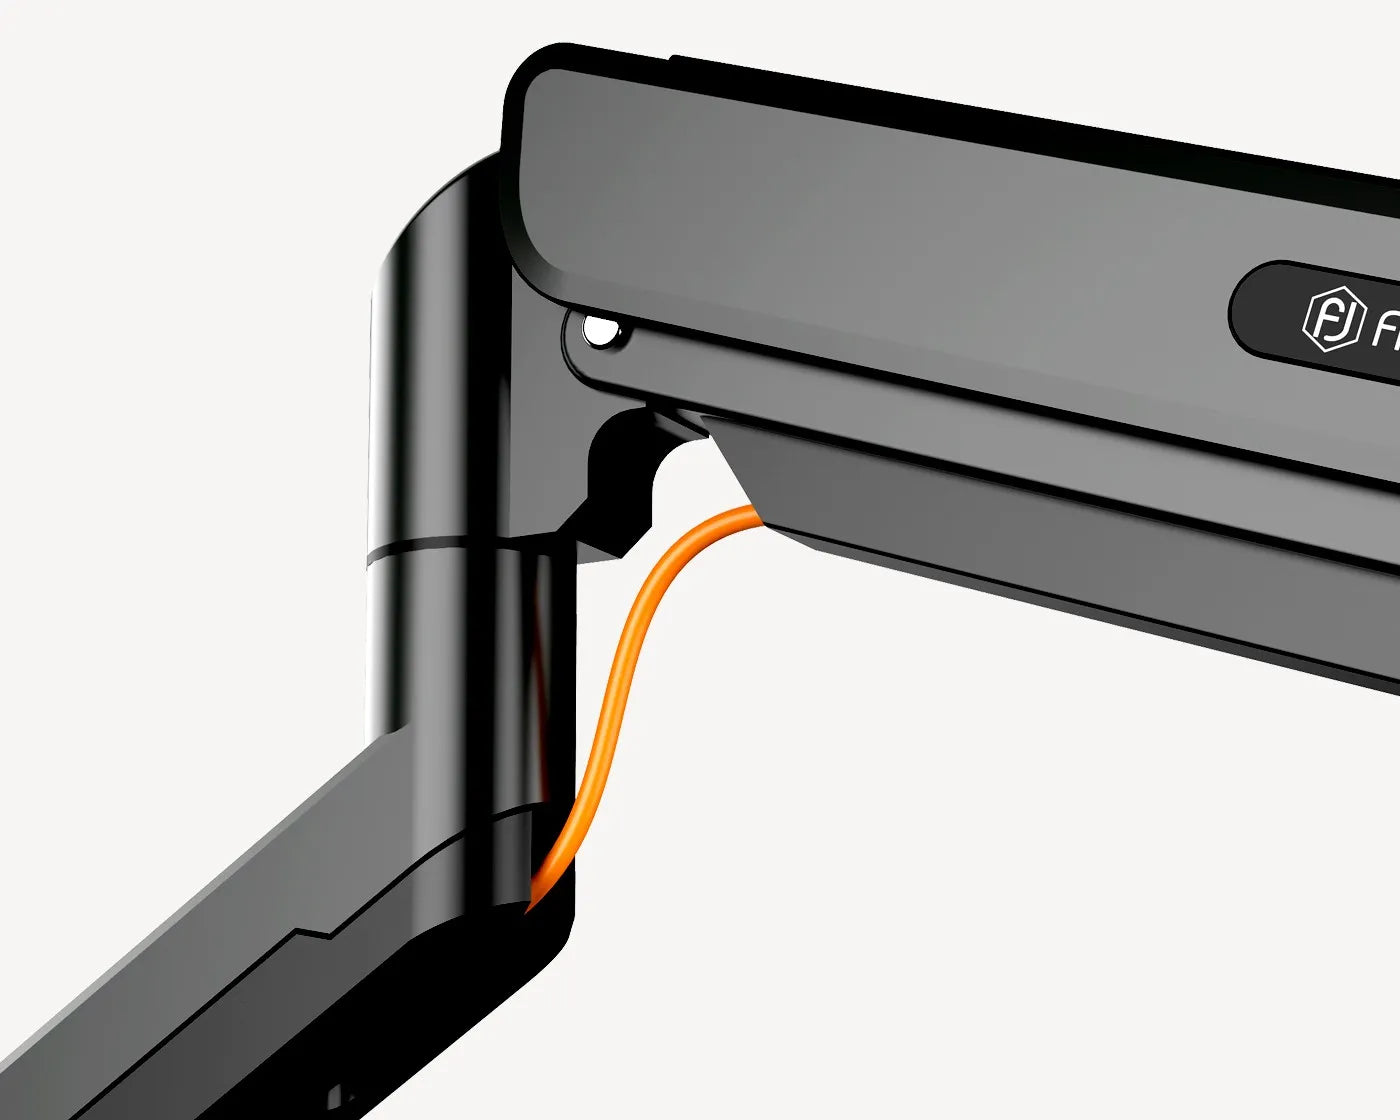 Integrated cable management feature of the Flujo XTFlex monitor arm for a tidy workspace.